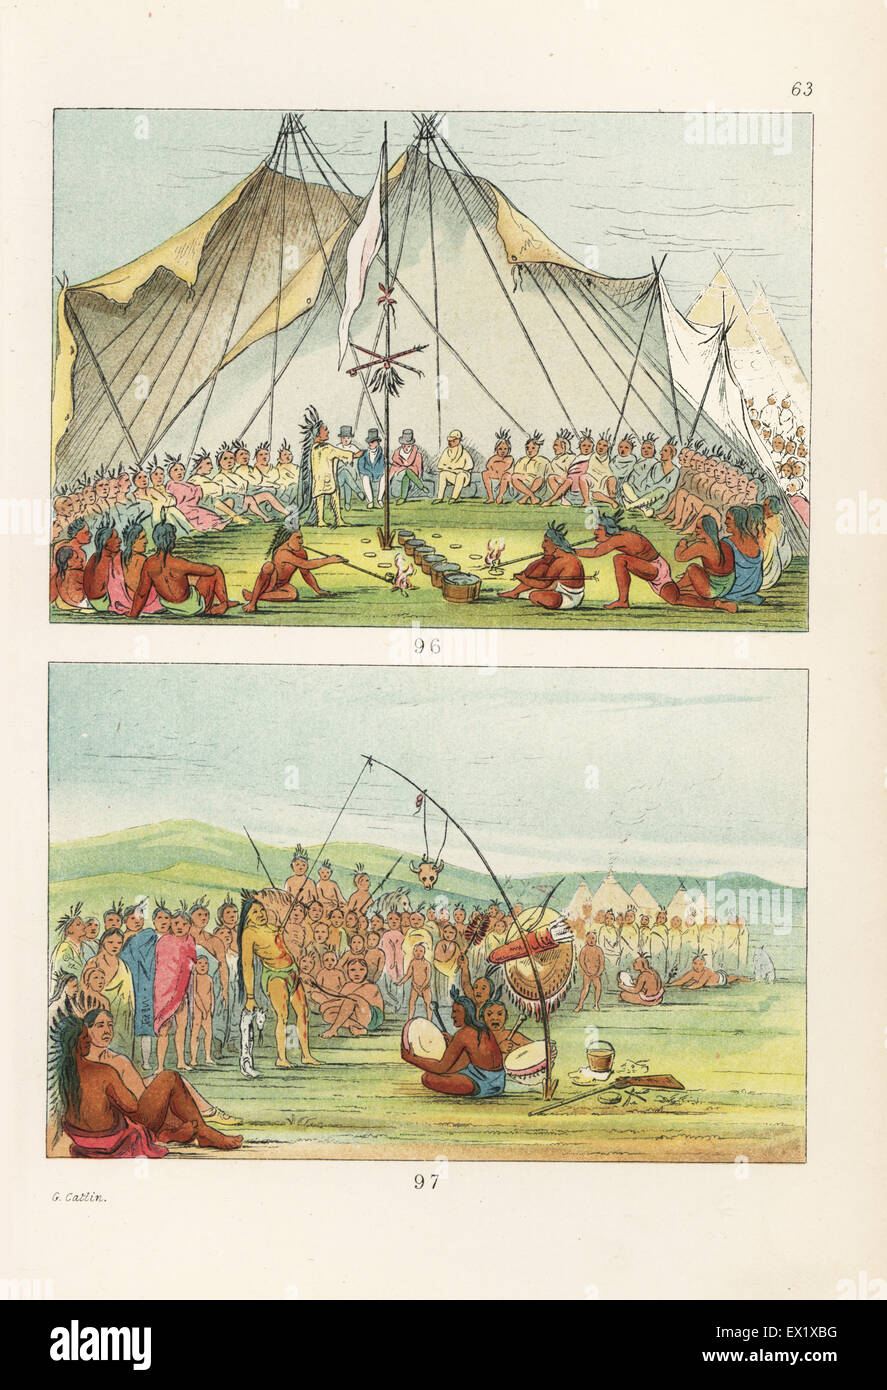 Dog Feast with dog meat given by Sioux chiefs He-wan-je-tah and Tehan-dee for visitors including George Catlin, and the body-suspension ritual of Looking at the Sun performed by a Sioux brave with splints skewered into his chest tied to a pole while medicine men chant and beat drums. Handcoloured lithograph from George Catlin's Manners, Customs and Condition of the North American Indians, London, 1841. Stock Photo